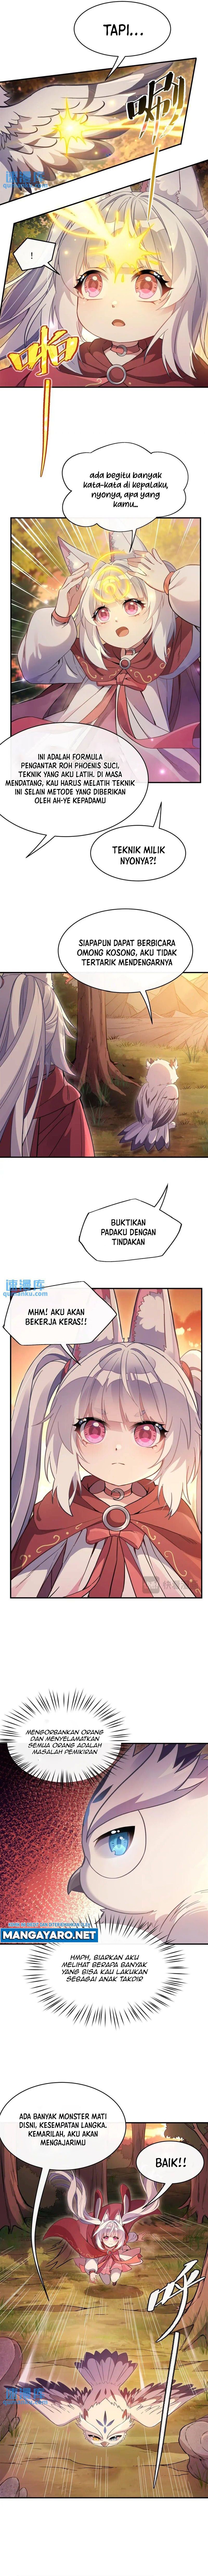 Dilarang COPAS - situs resmi www.mangacanblog.com - Komik my female apprentices are all big shots from the future 202 - chapter 202 203 Indonesia my female apprentices are all big shots from the future 202 - chapter 202 Terbaru 4|Baca Manga Komik Indonesia|Mangacan